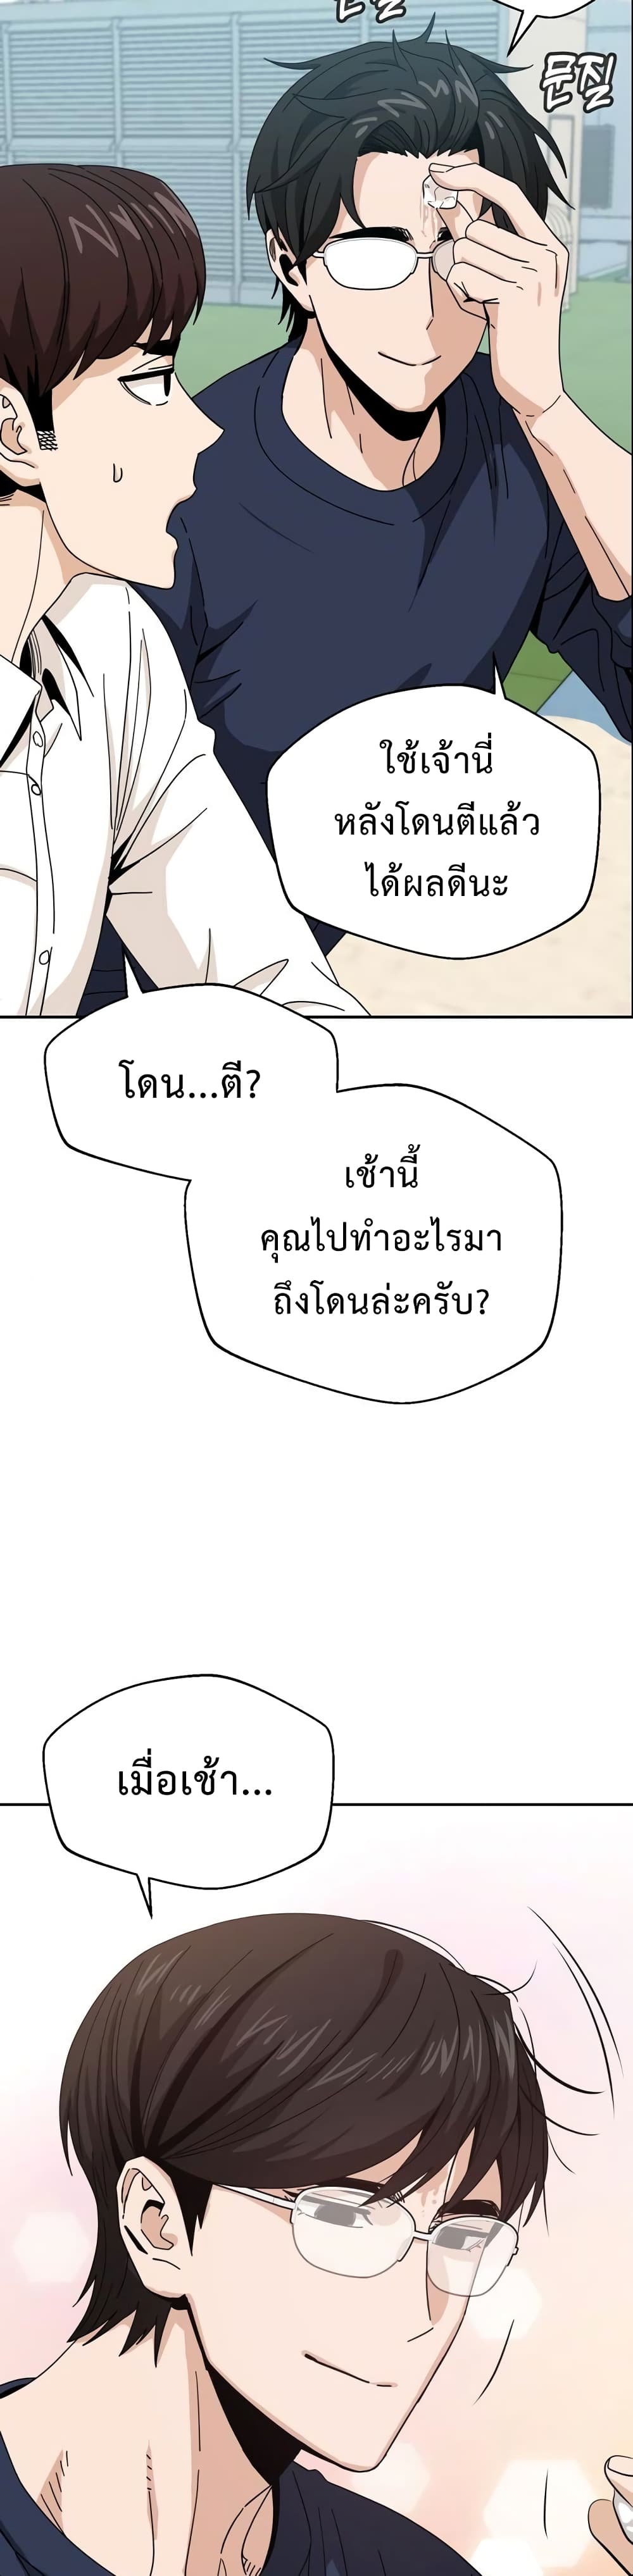 Match Made in Heaven by chance ตอนที่ 37 (41)